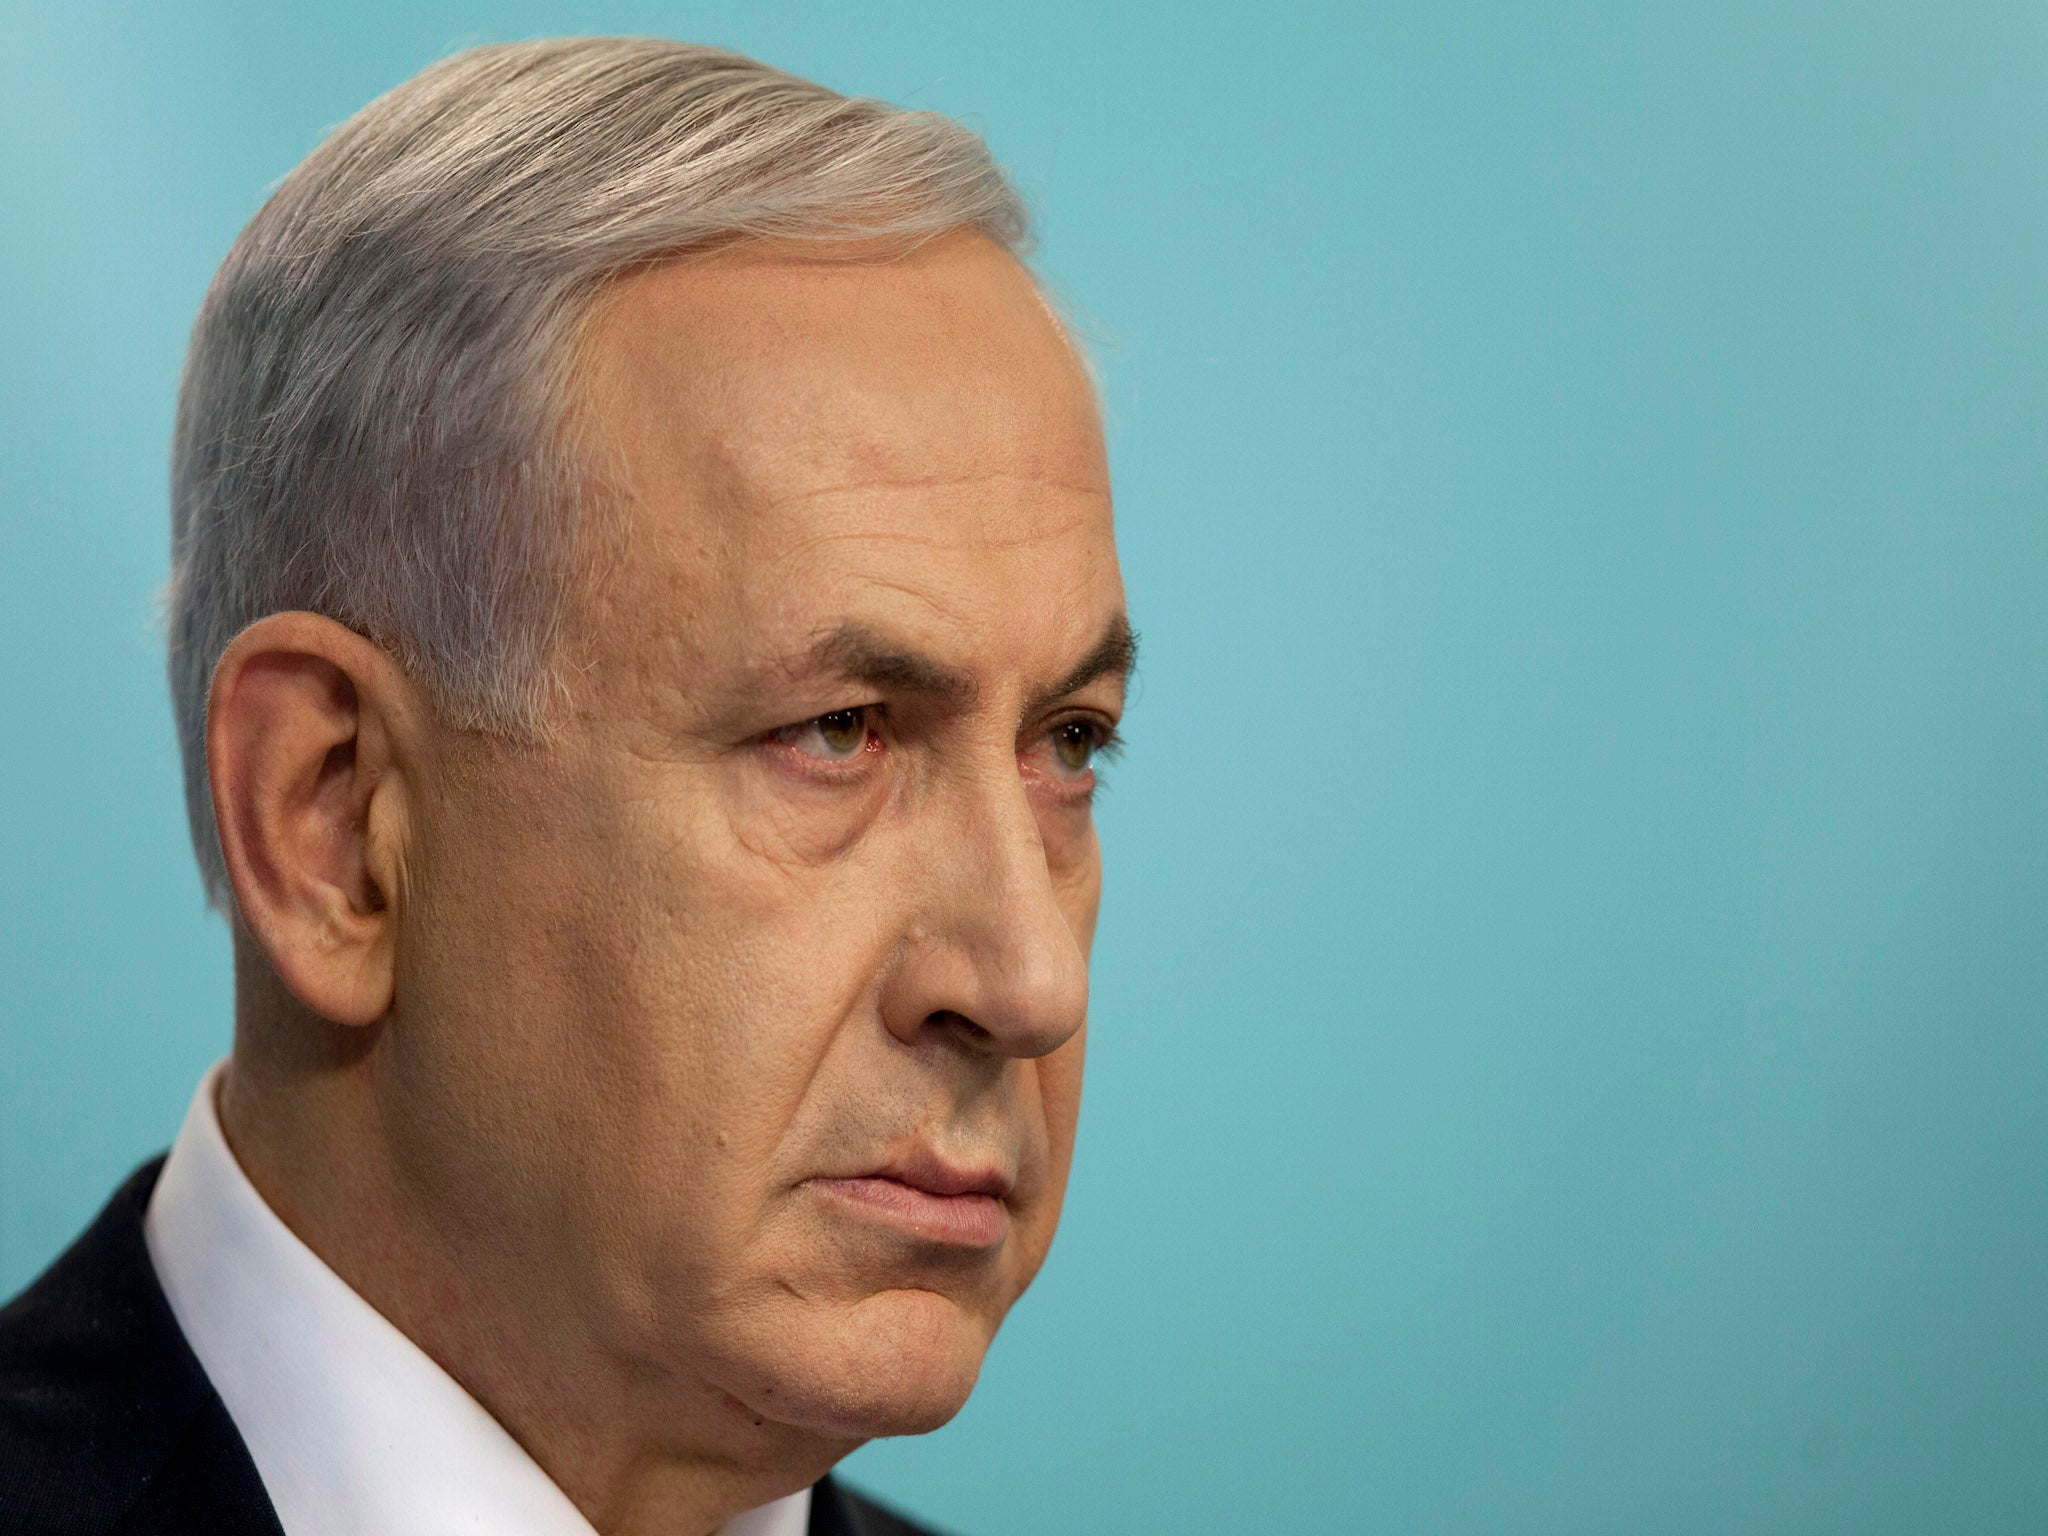 Israel's Benjamin Netanyahu is to address a joint session of Congress on Tuesday evening